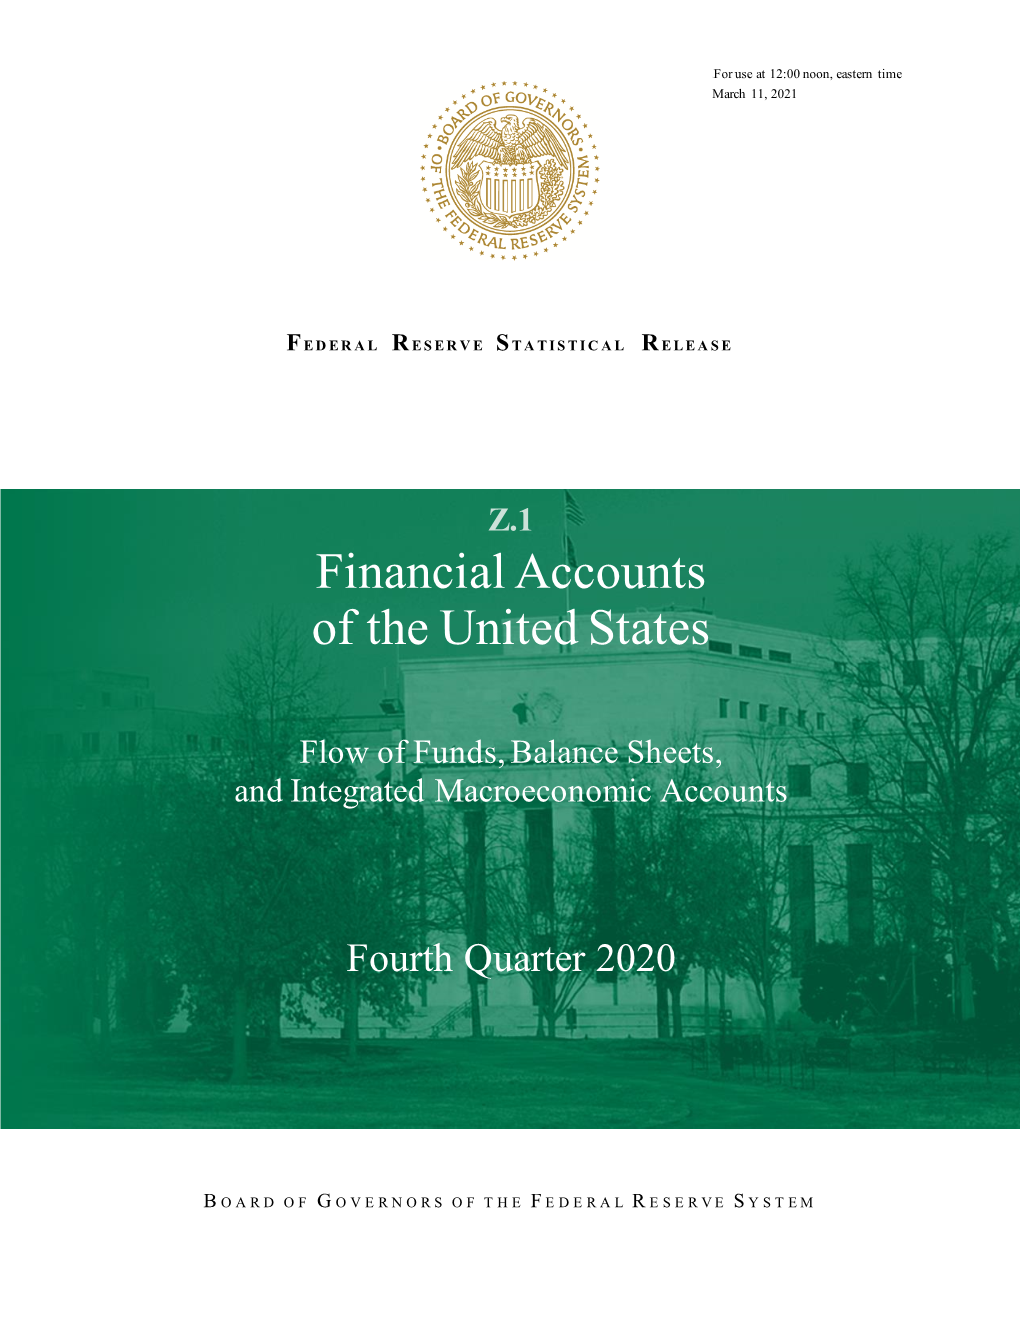 Financial Accounts of the United States